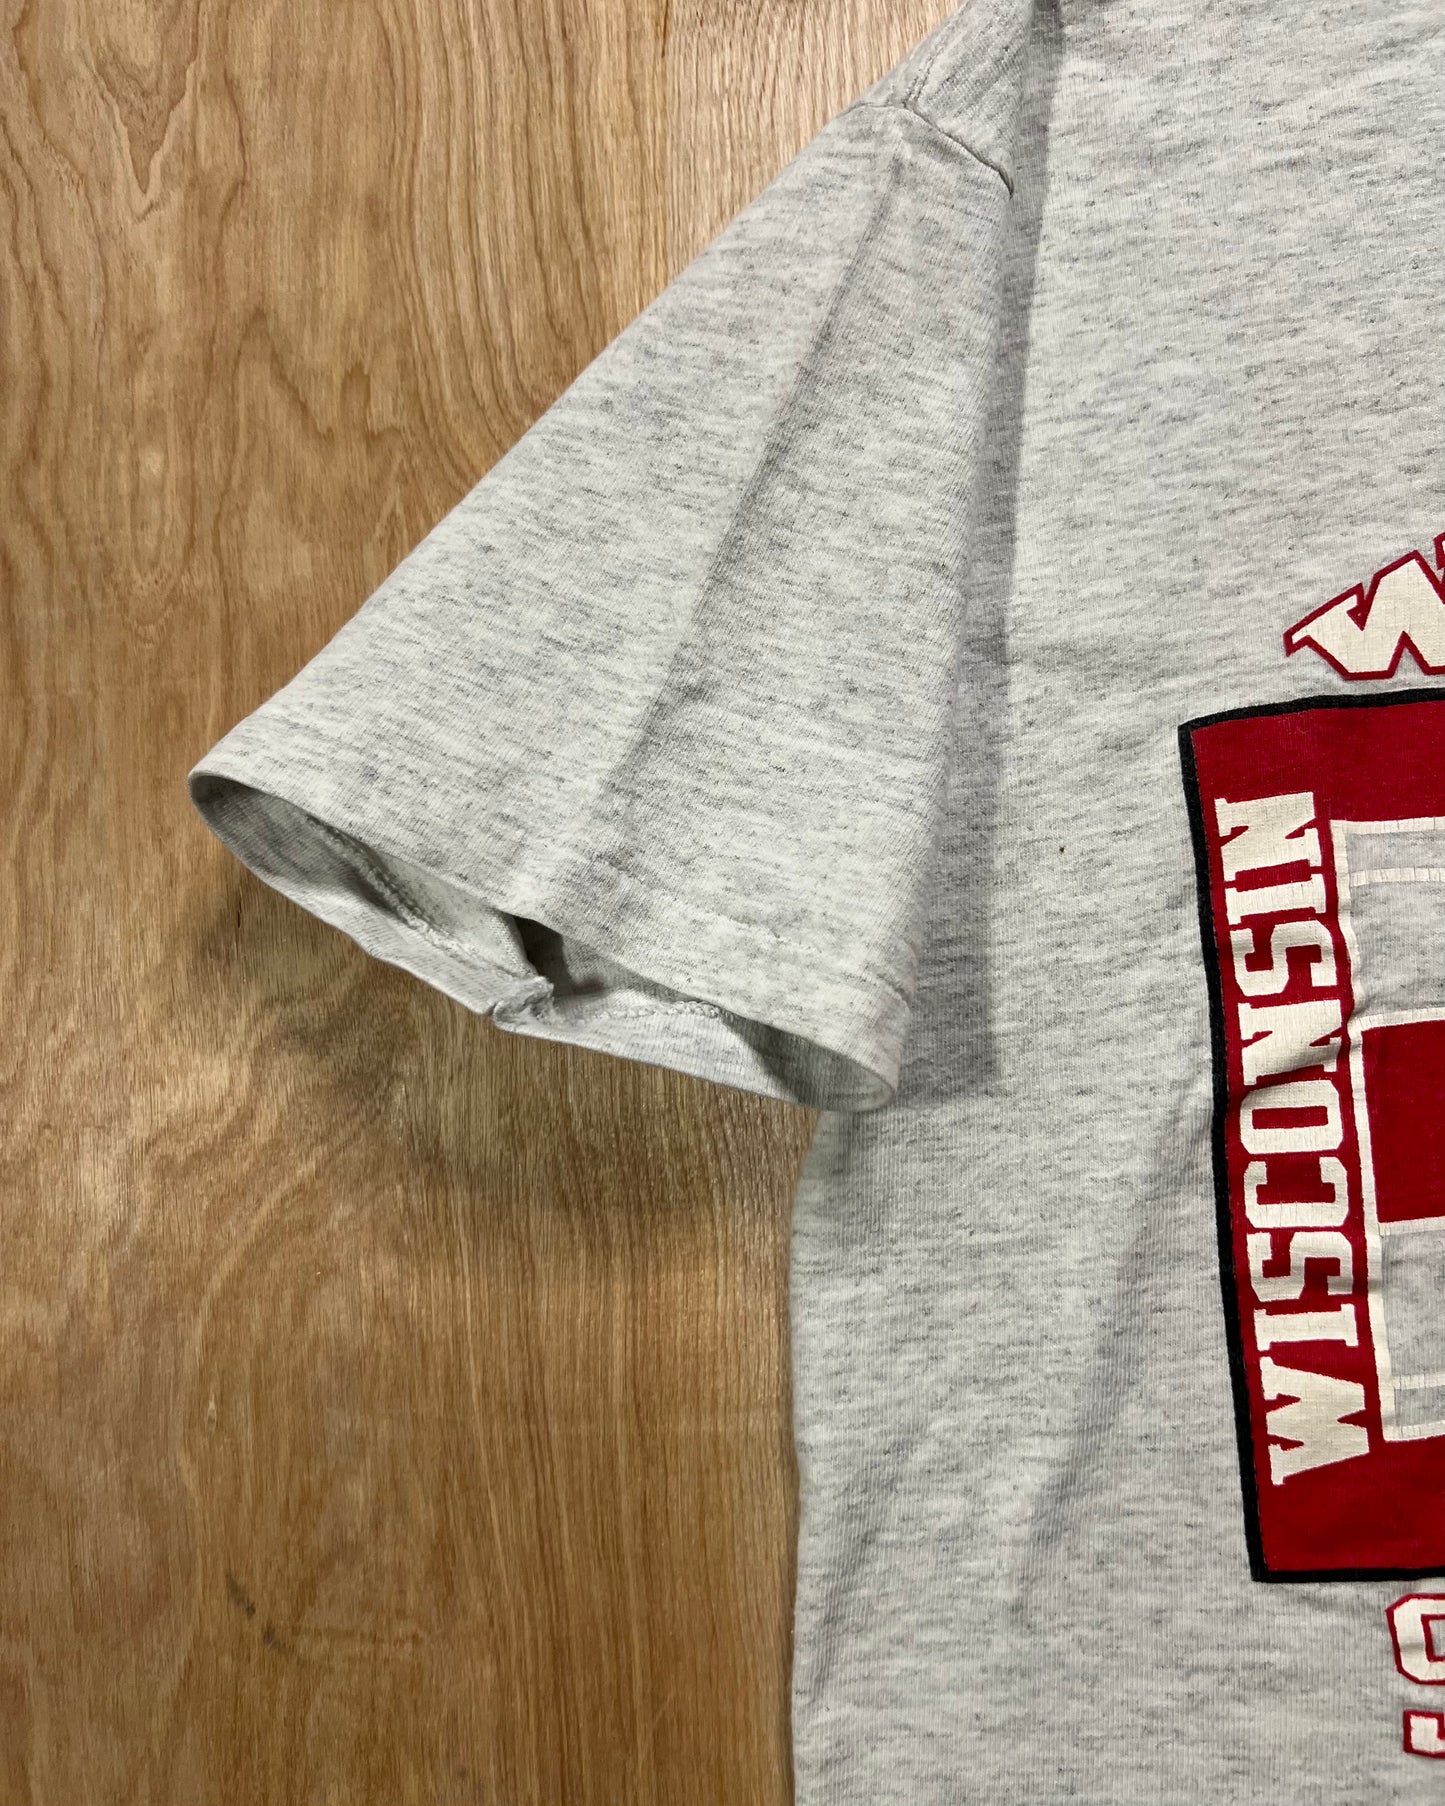 Early 1990's Wisconsin Badgers Supreme Court Basketball Single Stitch T-Shirt